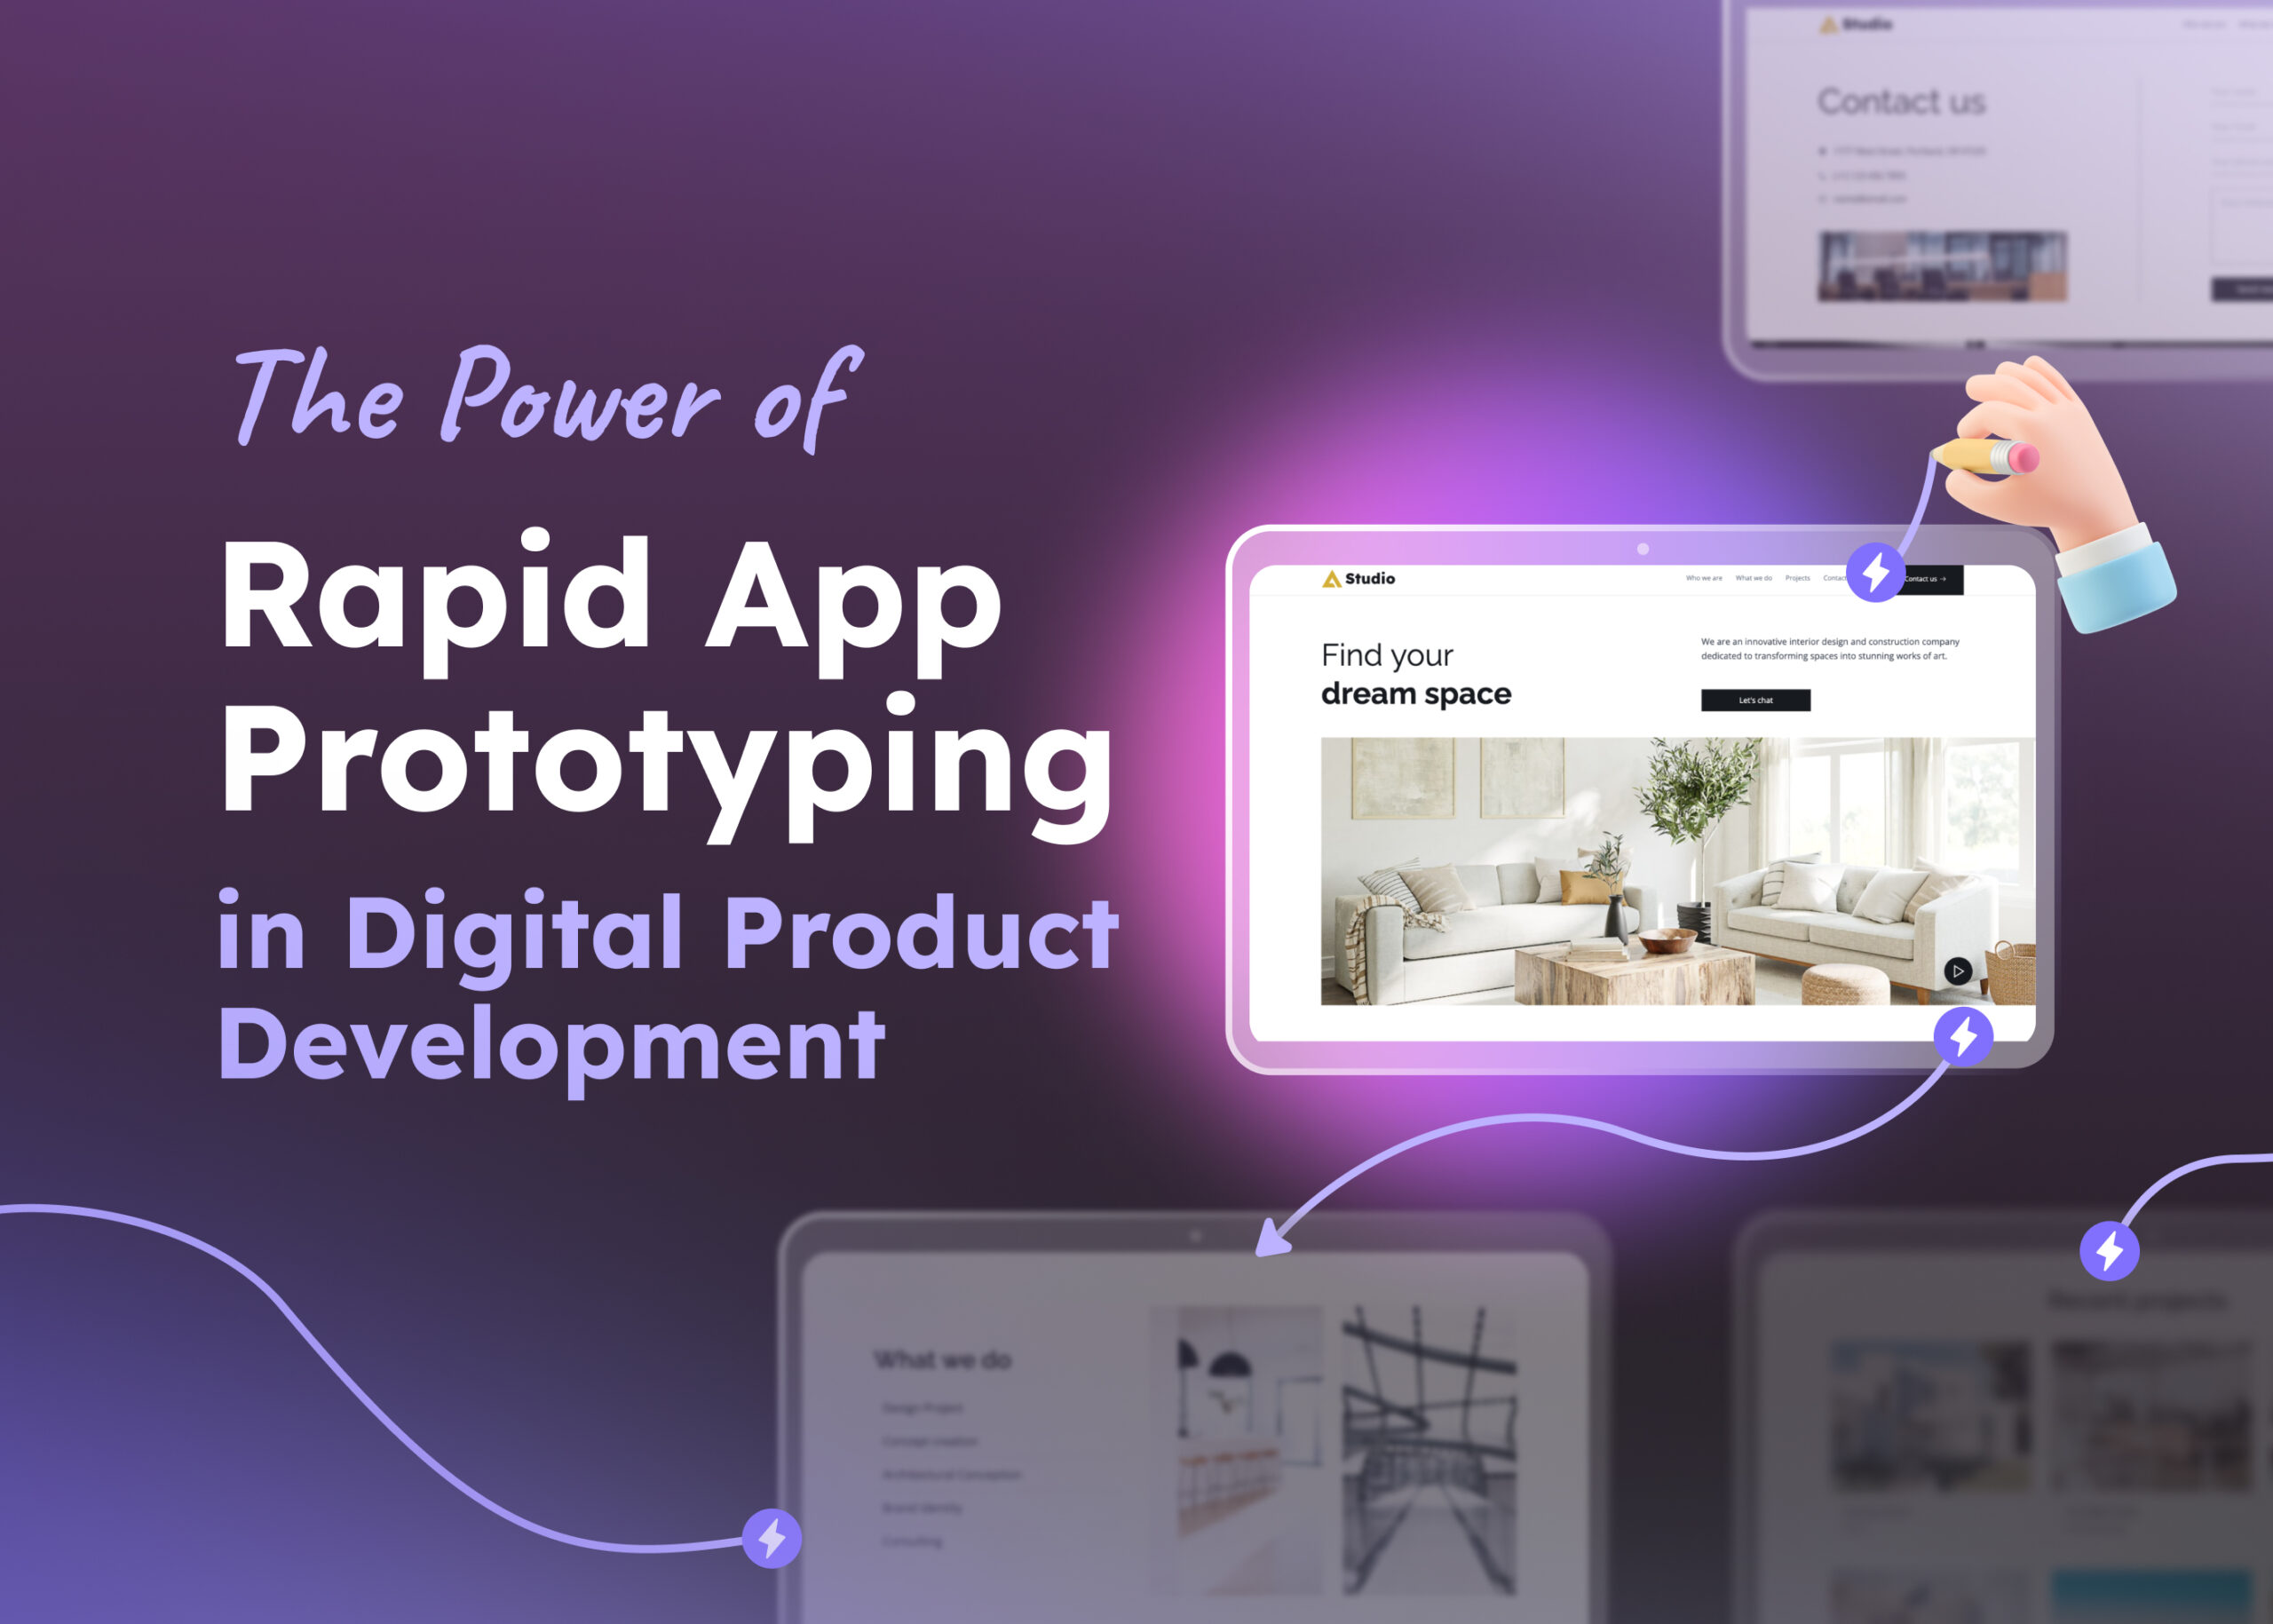 The Power of Rapid App Prototyping in Digital Product Development